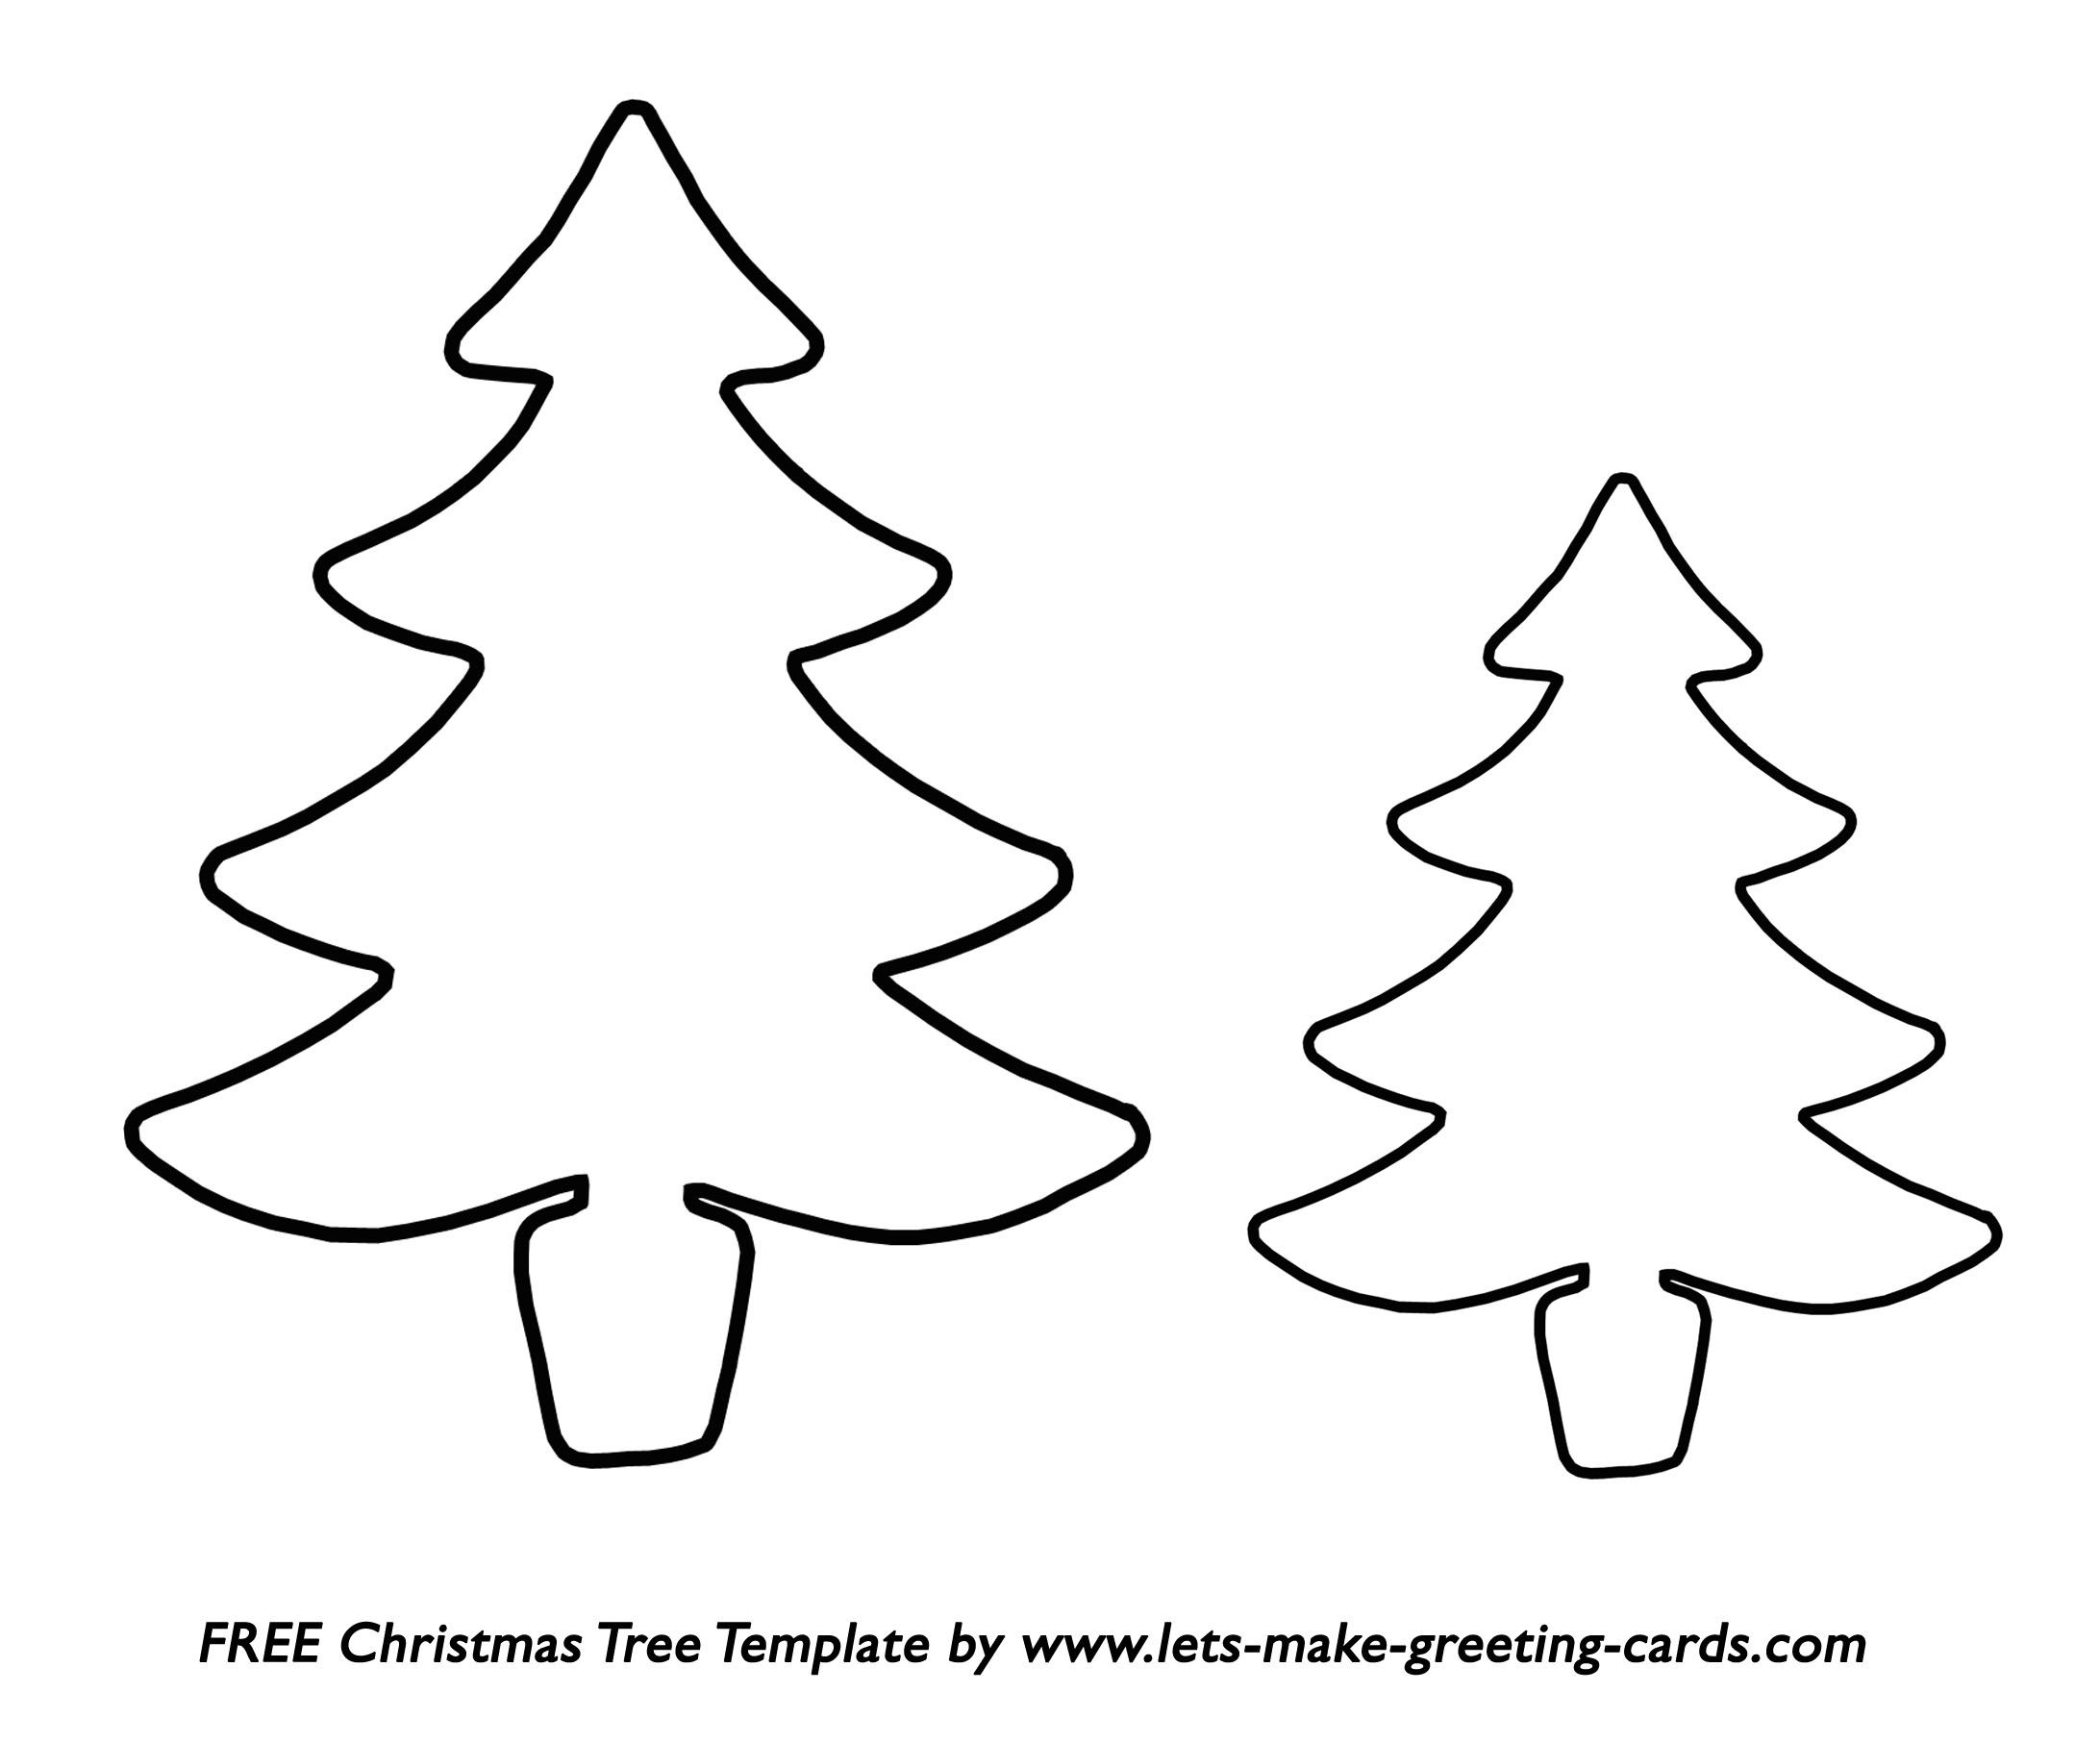 Christmas Tree Templates In All Shapes And Sizes - Free Printable Christmas Tree Images